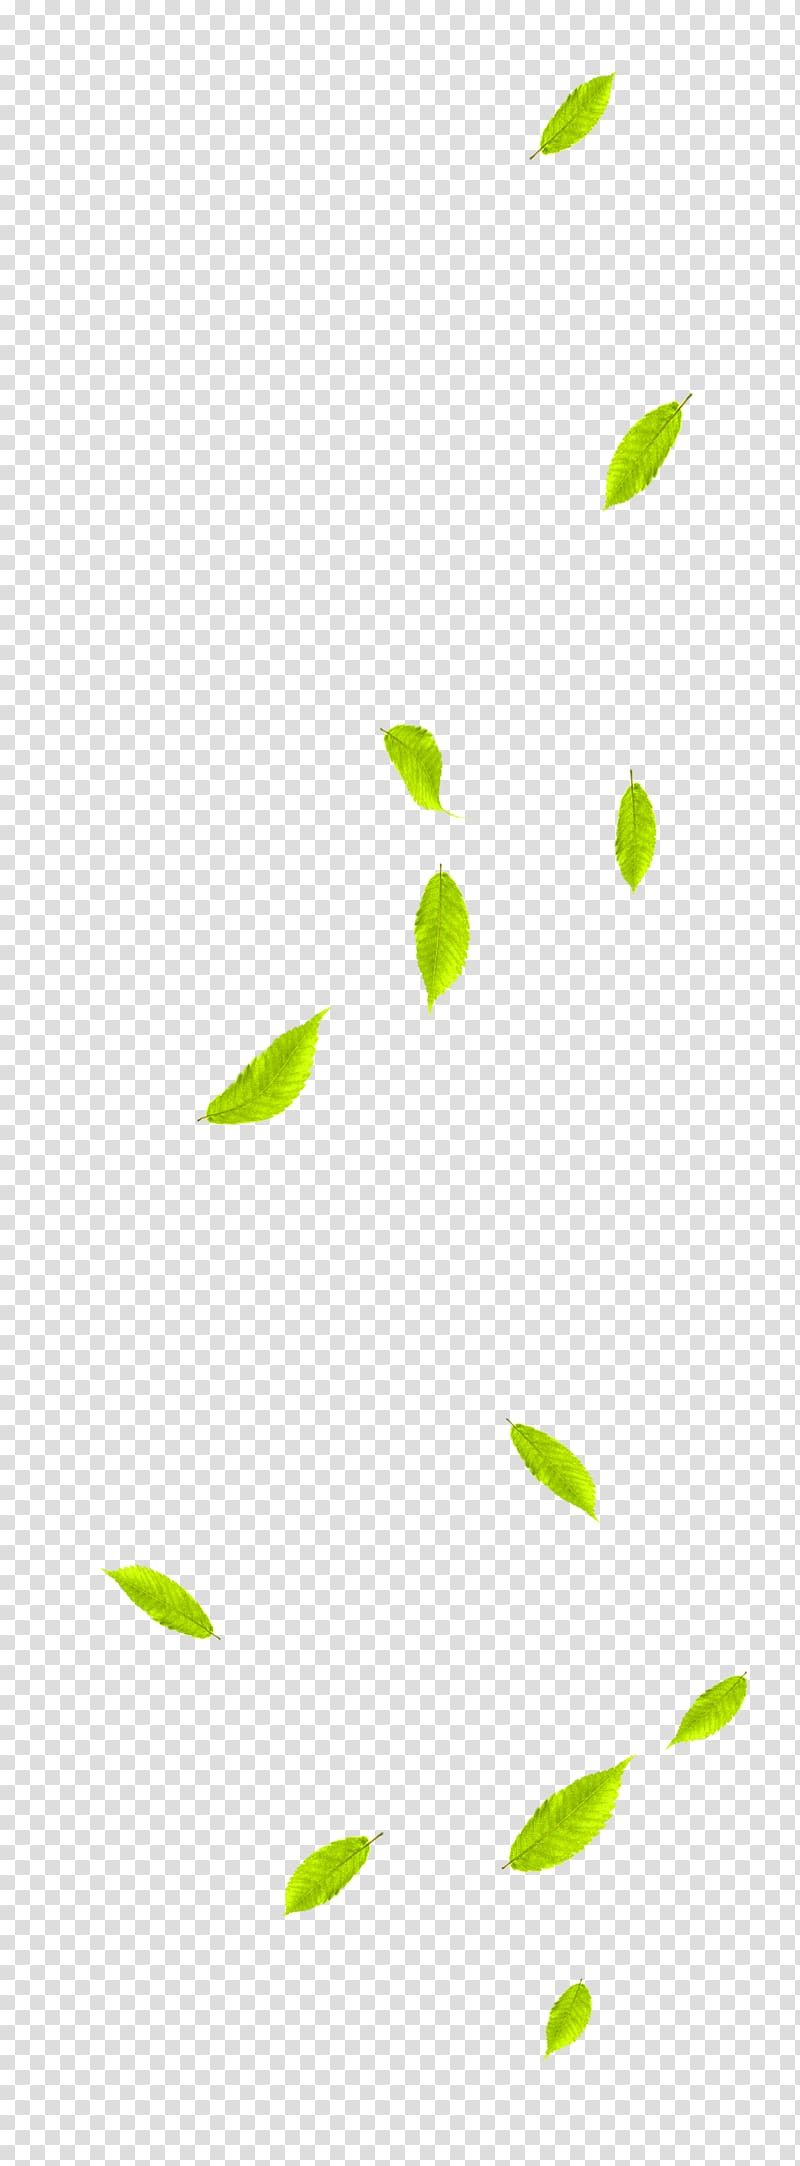 Leaf Green, Green and fresh leaves floating material transparent background PNG clipart